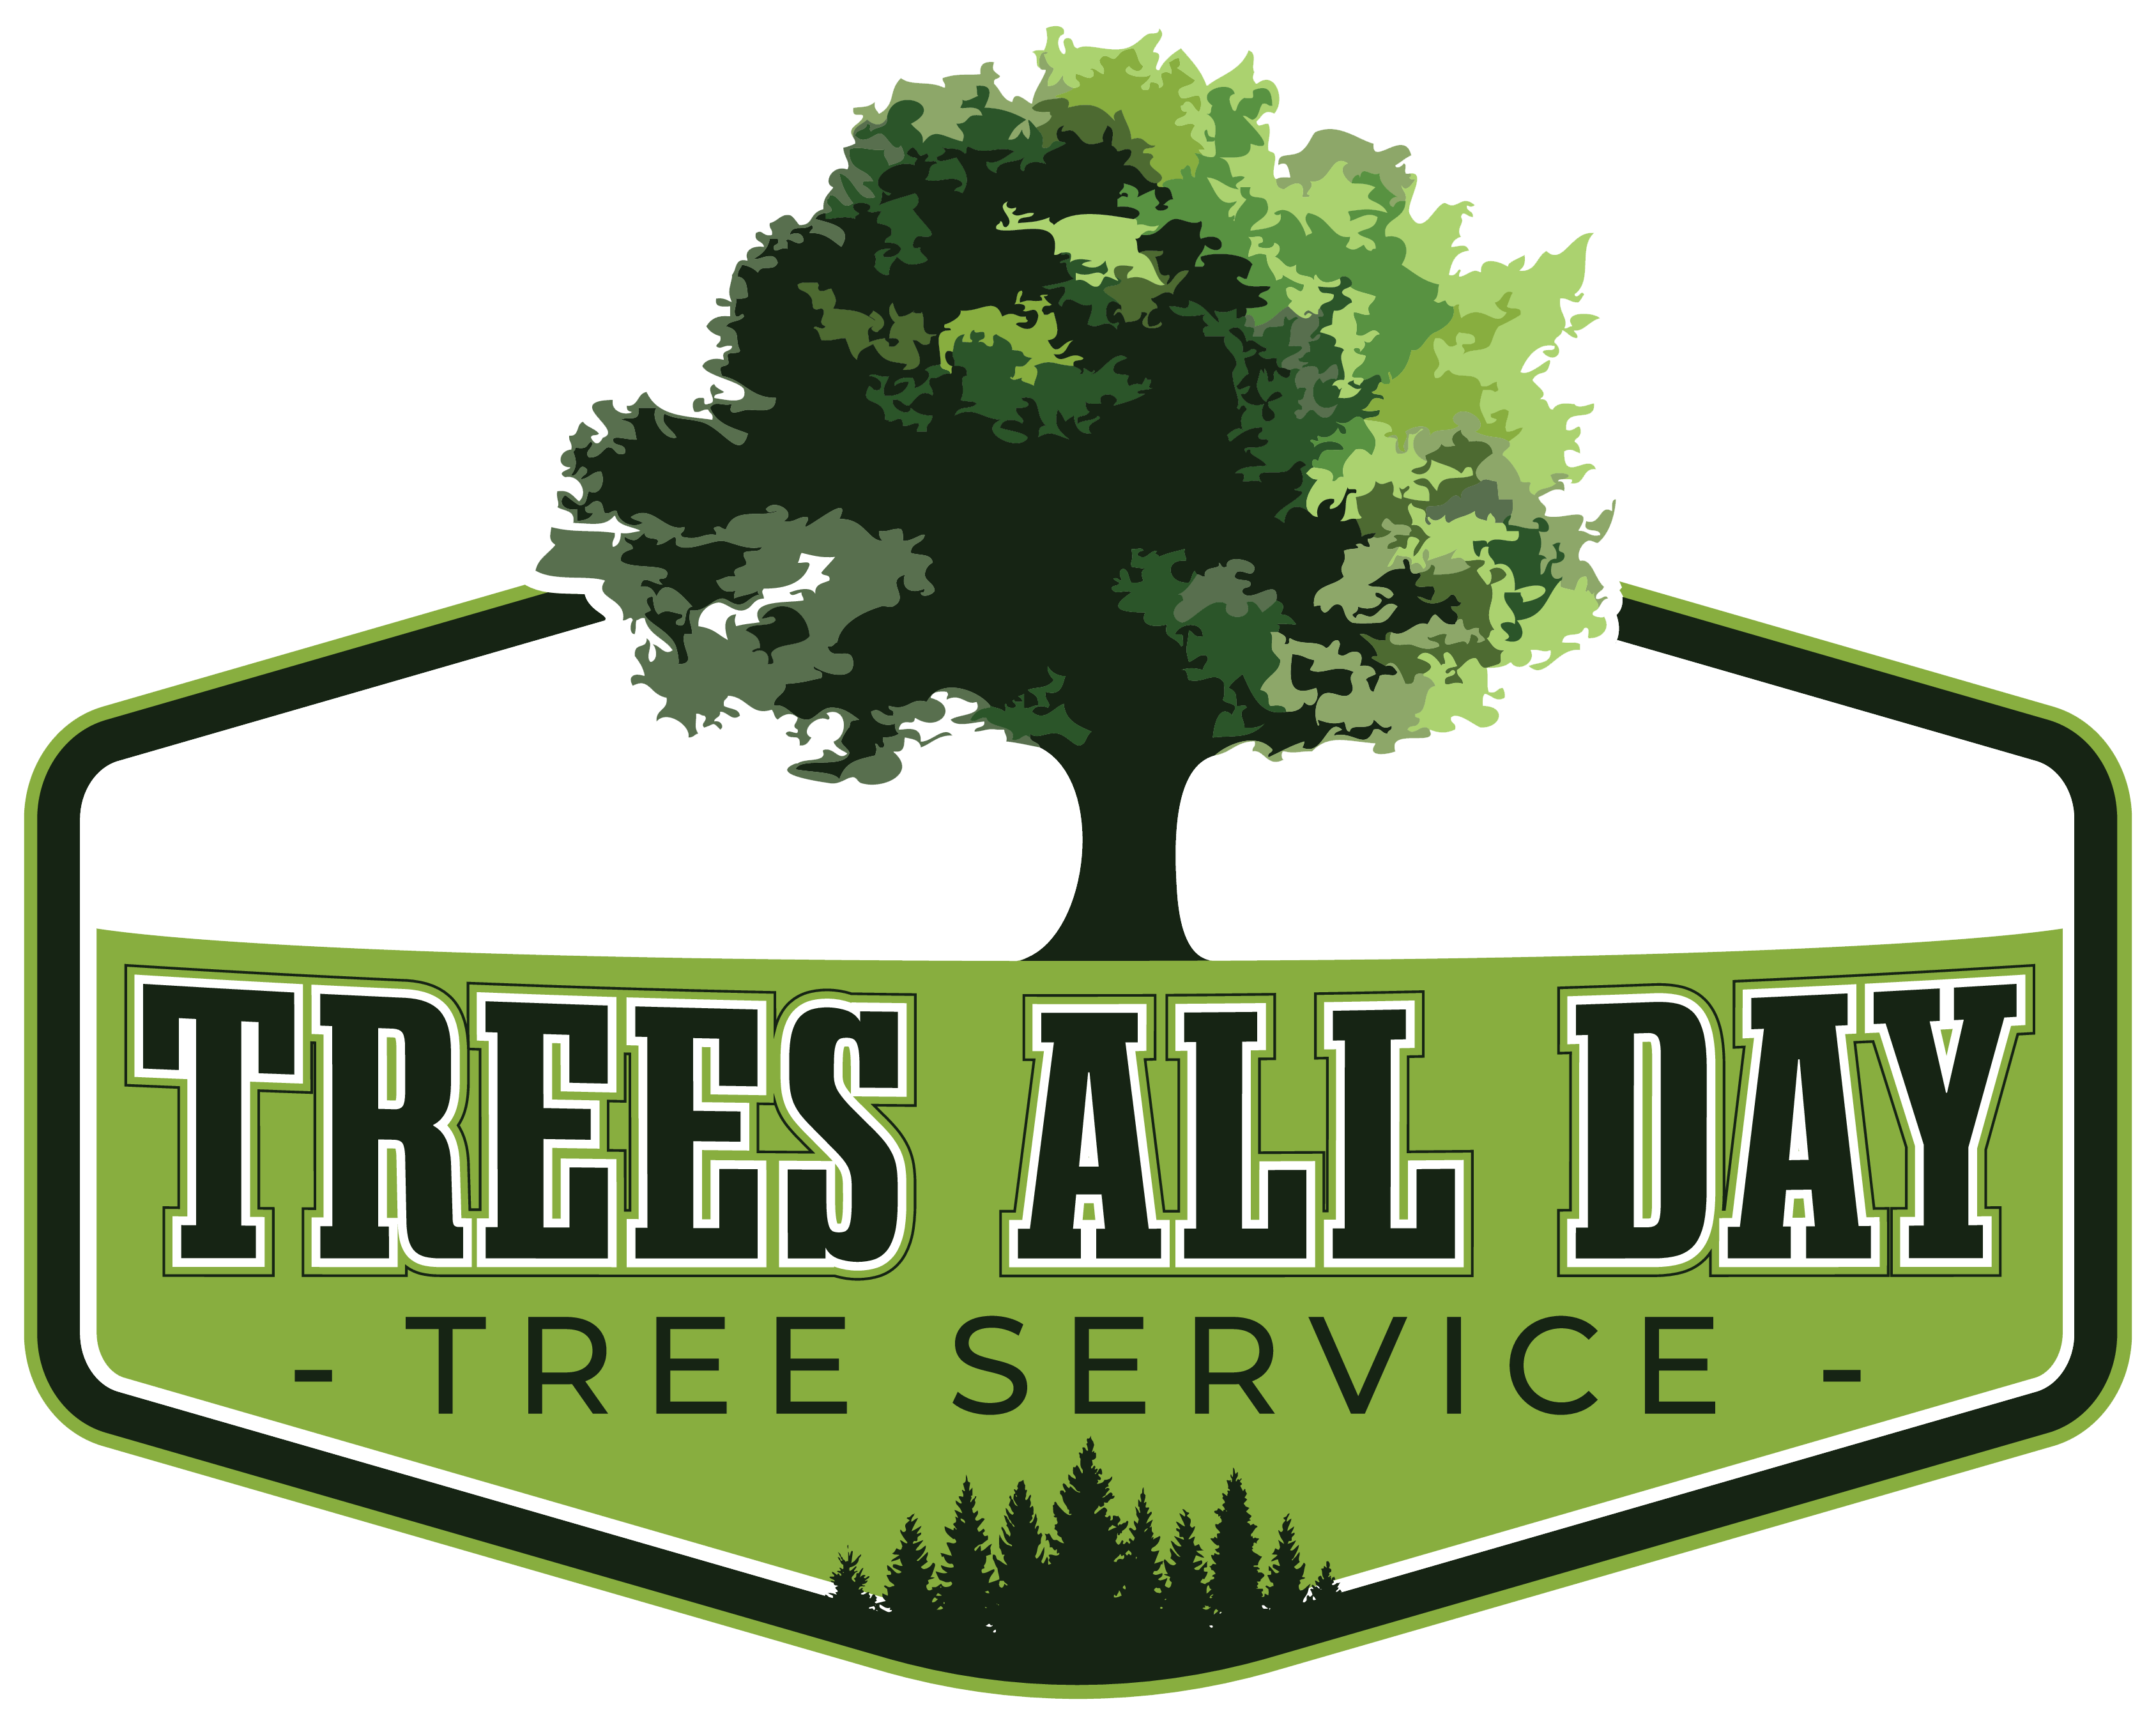 Expert Tree Service Company in Nampa, ID - Trees All Day